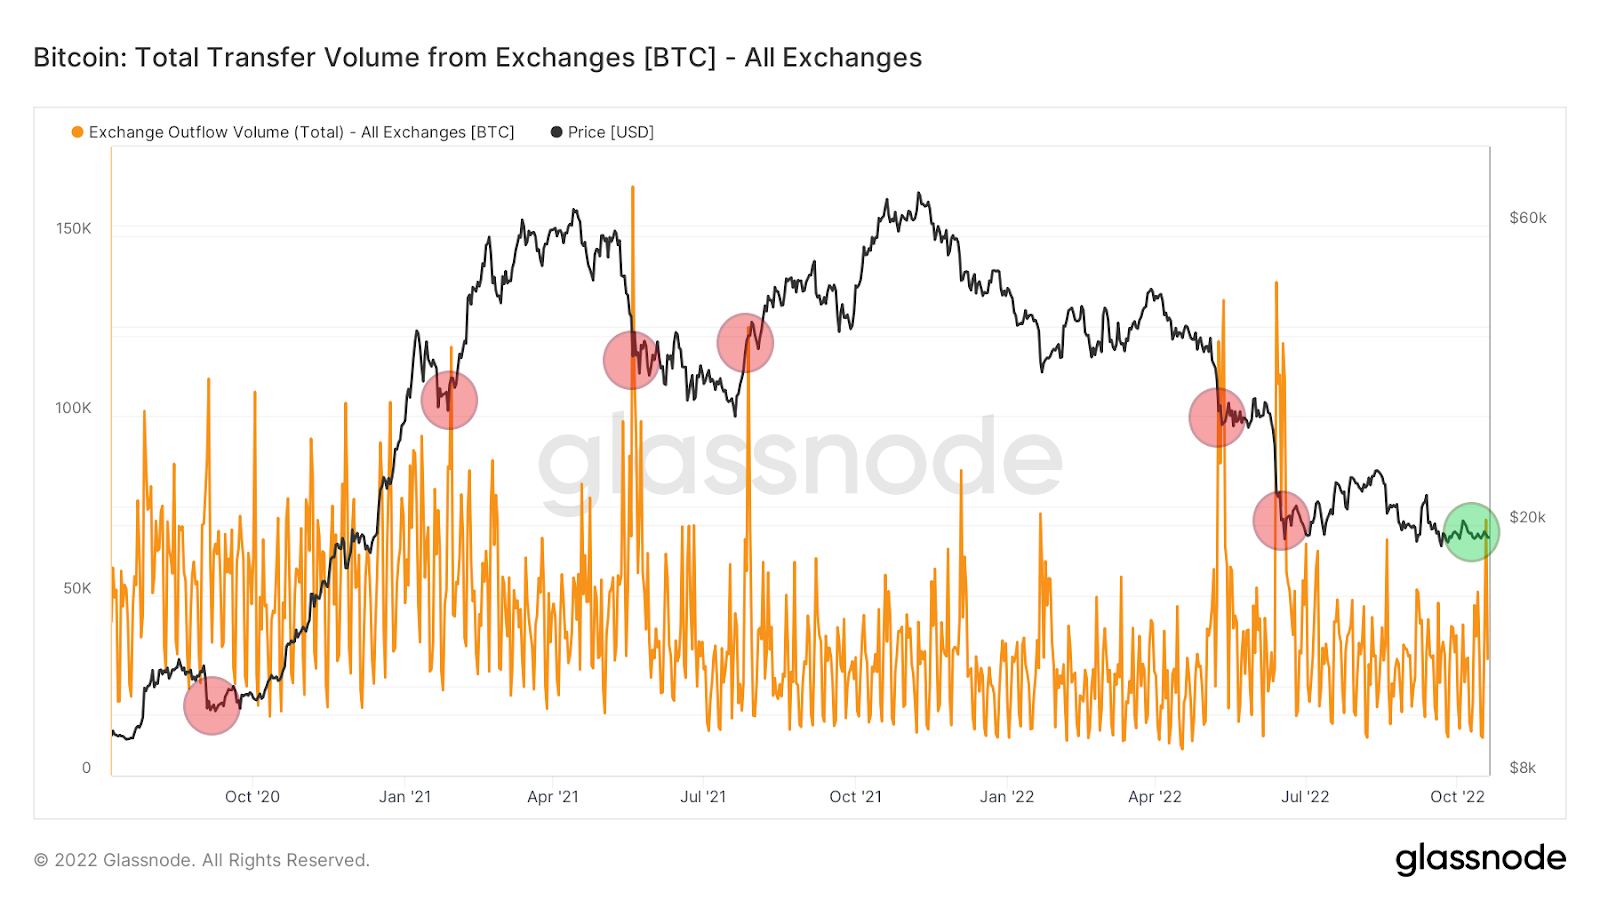 Bitcoin total transfer volume from exchanges